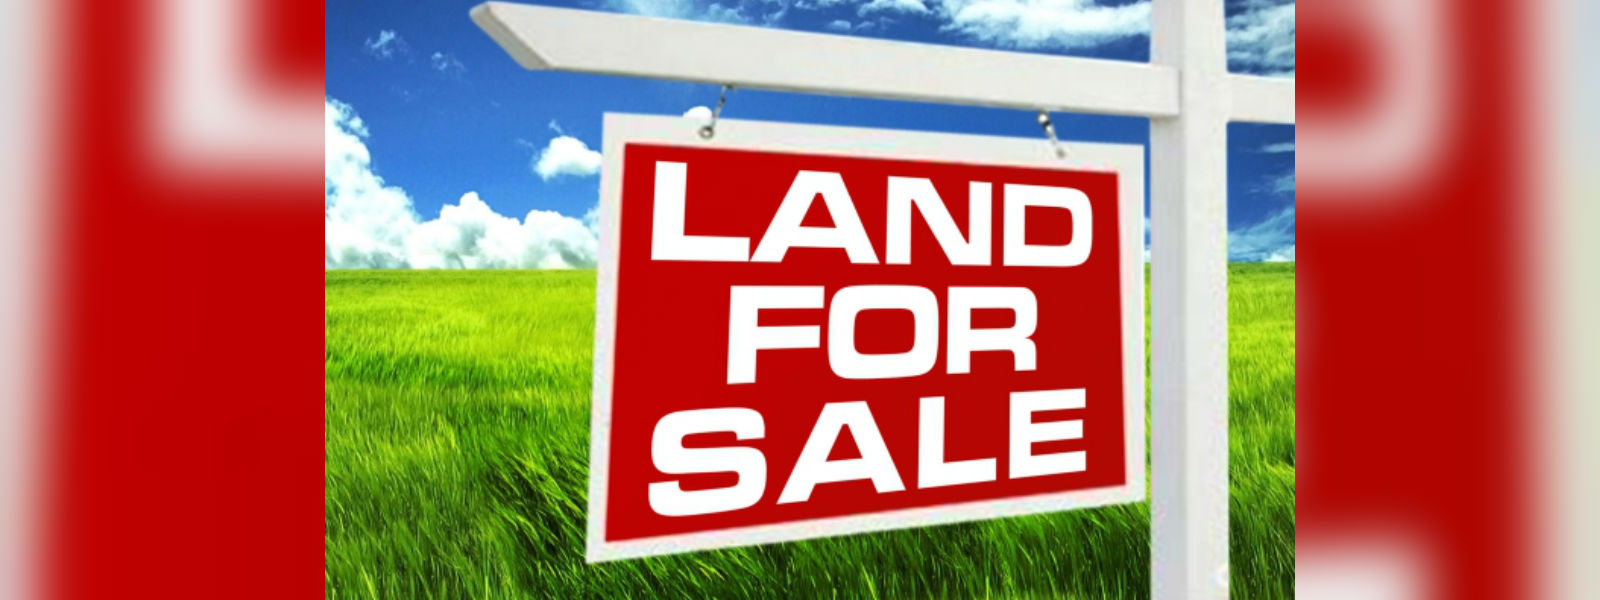 CBSL releases Land Price Index for 2018